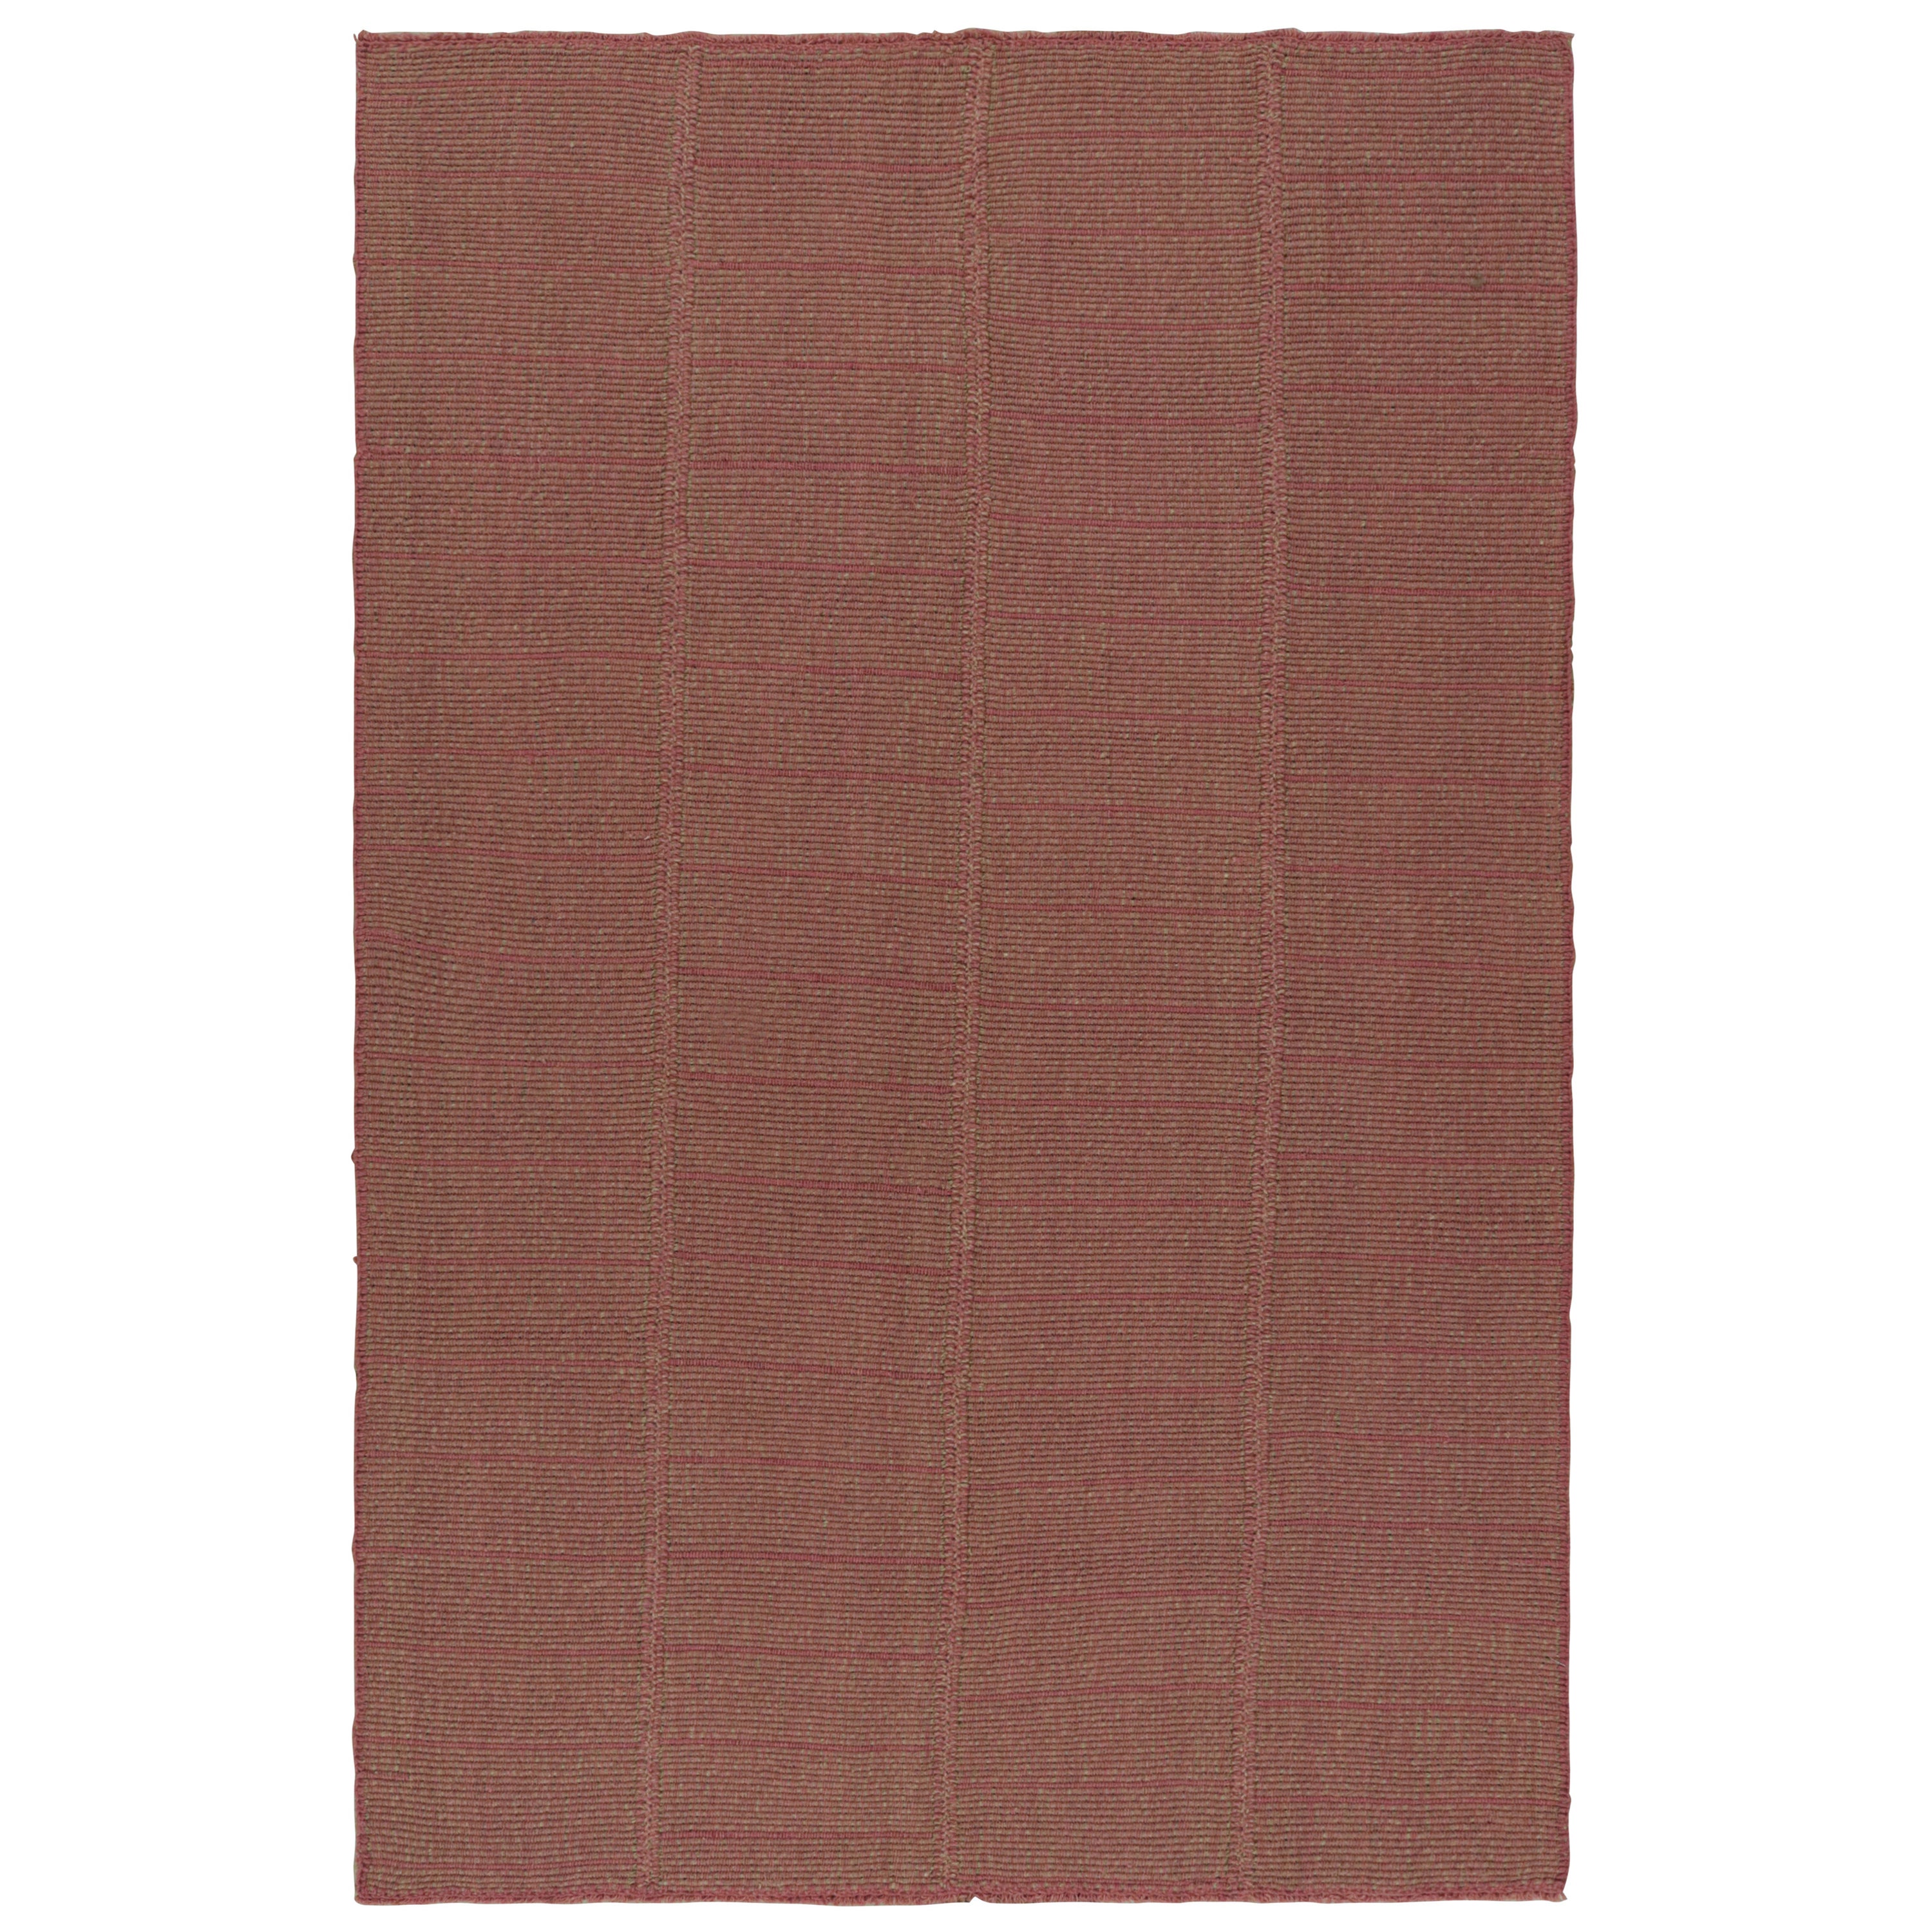 Rug & Kilim’s Modern Kilim Rug with Textural Stripes in Pink with Beige Accents